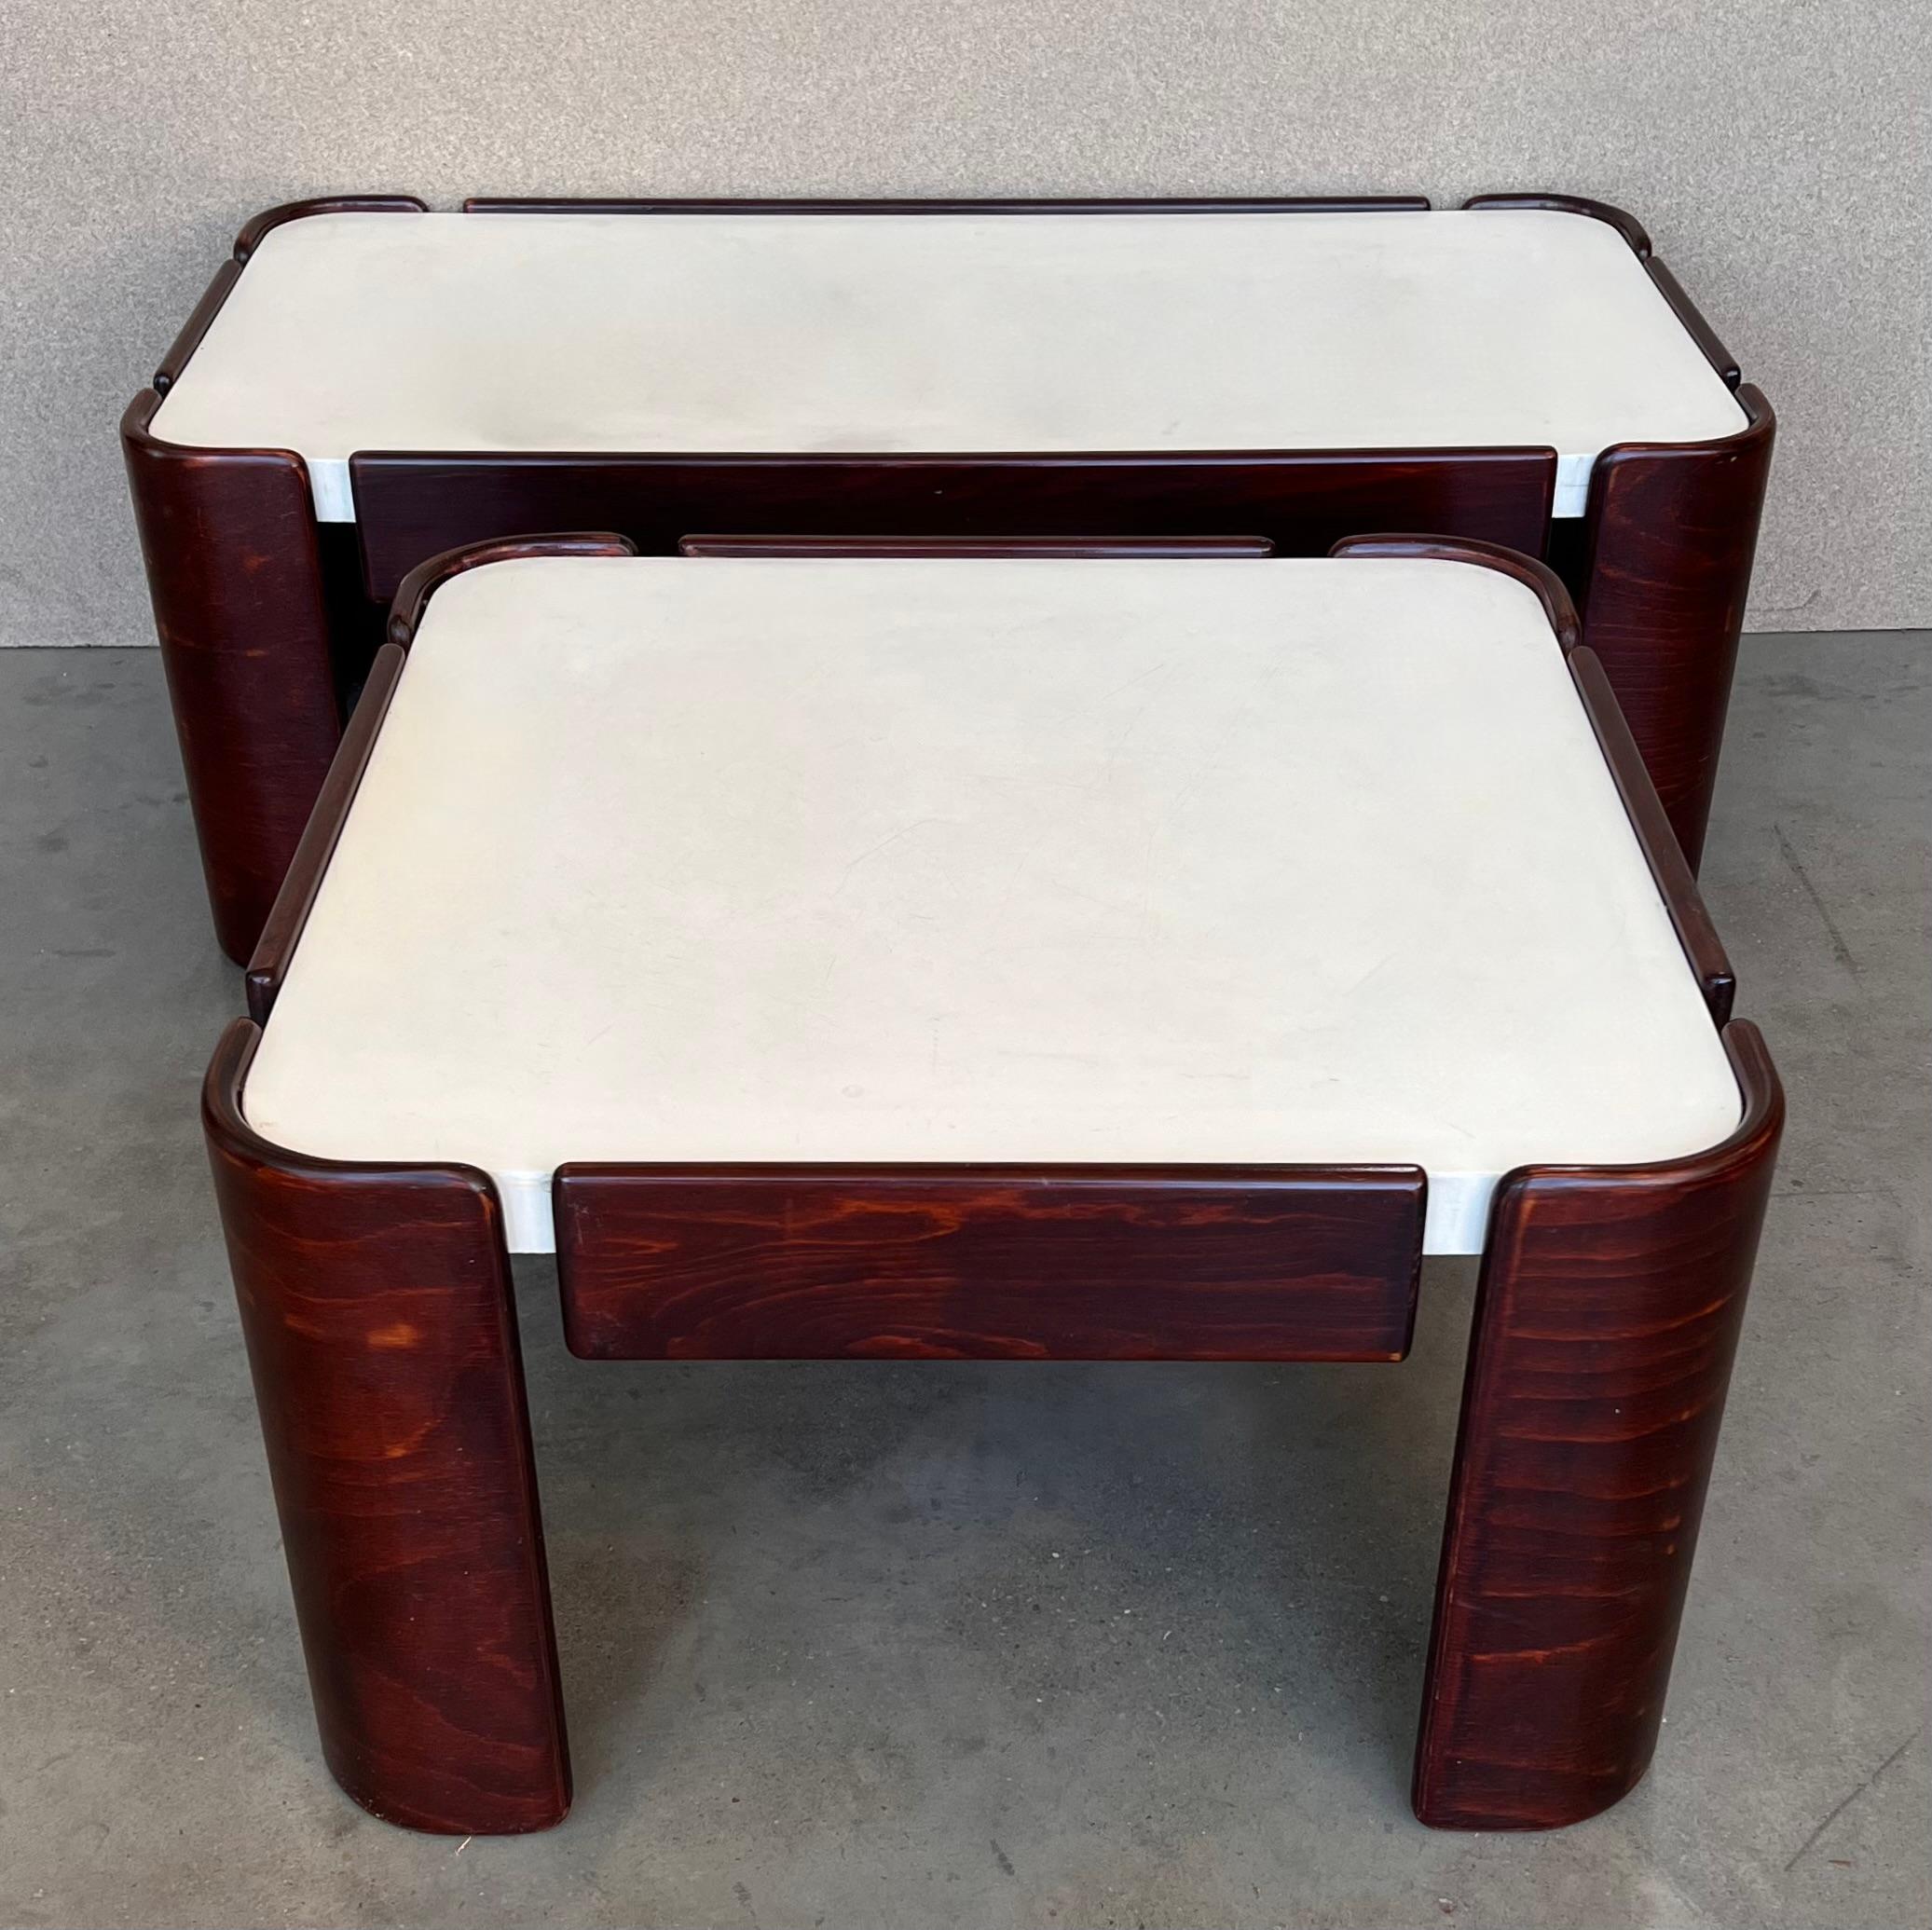 Elegant pair of mahogany coffee tables with white top in style of Afra & Tobia Scarpa for Cassina. 

Rectangular table : 
Height: 14.85 in (37.7 cm)
Width: 41.34 in (105 cm)
Depth: 21.74 in (55.2 cm).